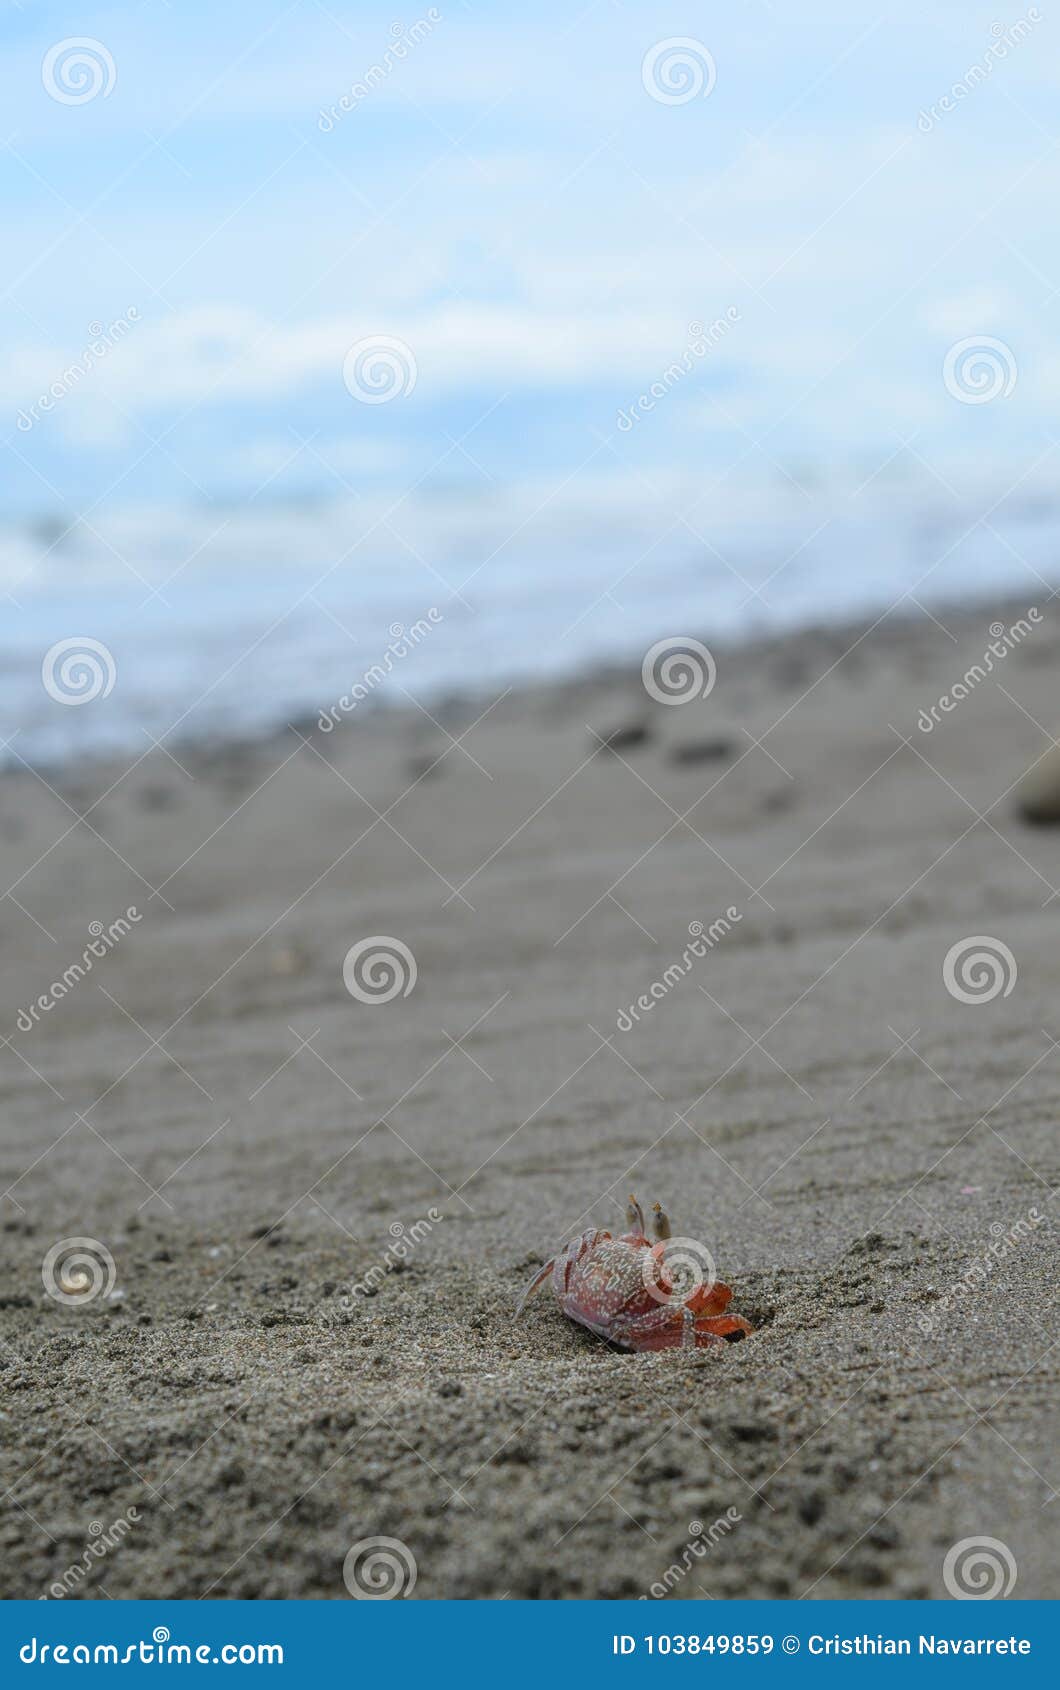 lonely crab